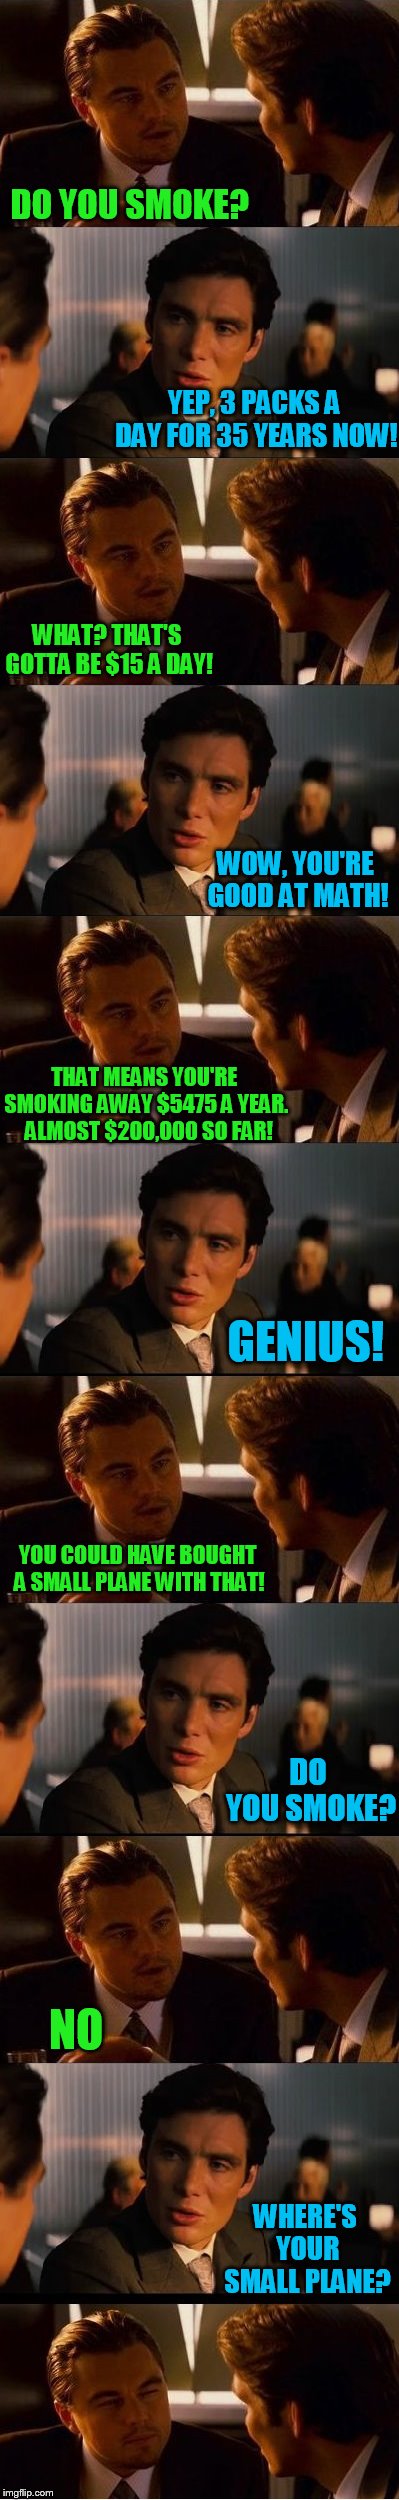 When you look at it that way.. | DO YOU SMOKE? YEP, 3 PACKS A DAY FOR 35 YEARS NOW! WHAT? THAT'S GOTTA BE $15 A DAY! WOW, YOU'RE GOOD AT MATH! THAT MEANS YOU'RE SMOKING AWAY $5475 A YEAR.  ALMOST $200,000 SO FAR! GENIUS! YOU COULD HAVE BOUGHT A SMALL PLANE WITH THAT! DO YOU SMOKE? NO; WHERE'S YOUR SMALL PLANE? | image tagged in smoking,hokeewolf is bored at work today | made w/ Imgflip meme maker